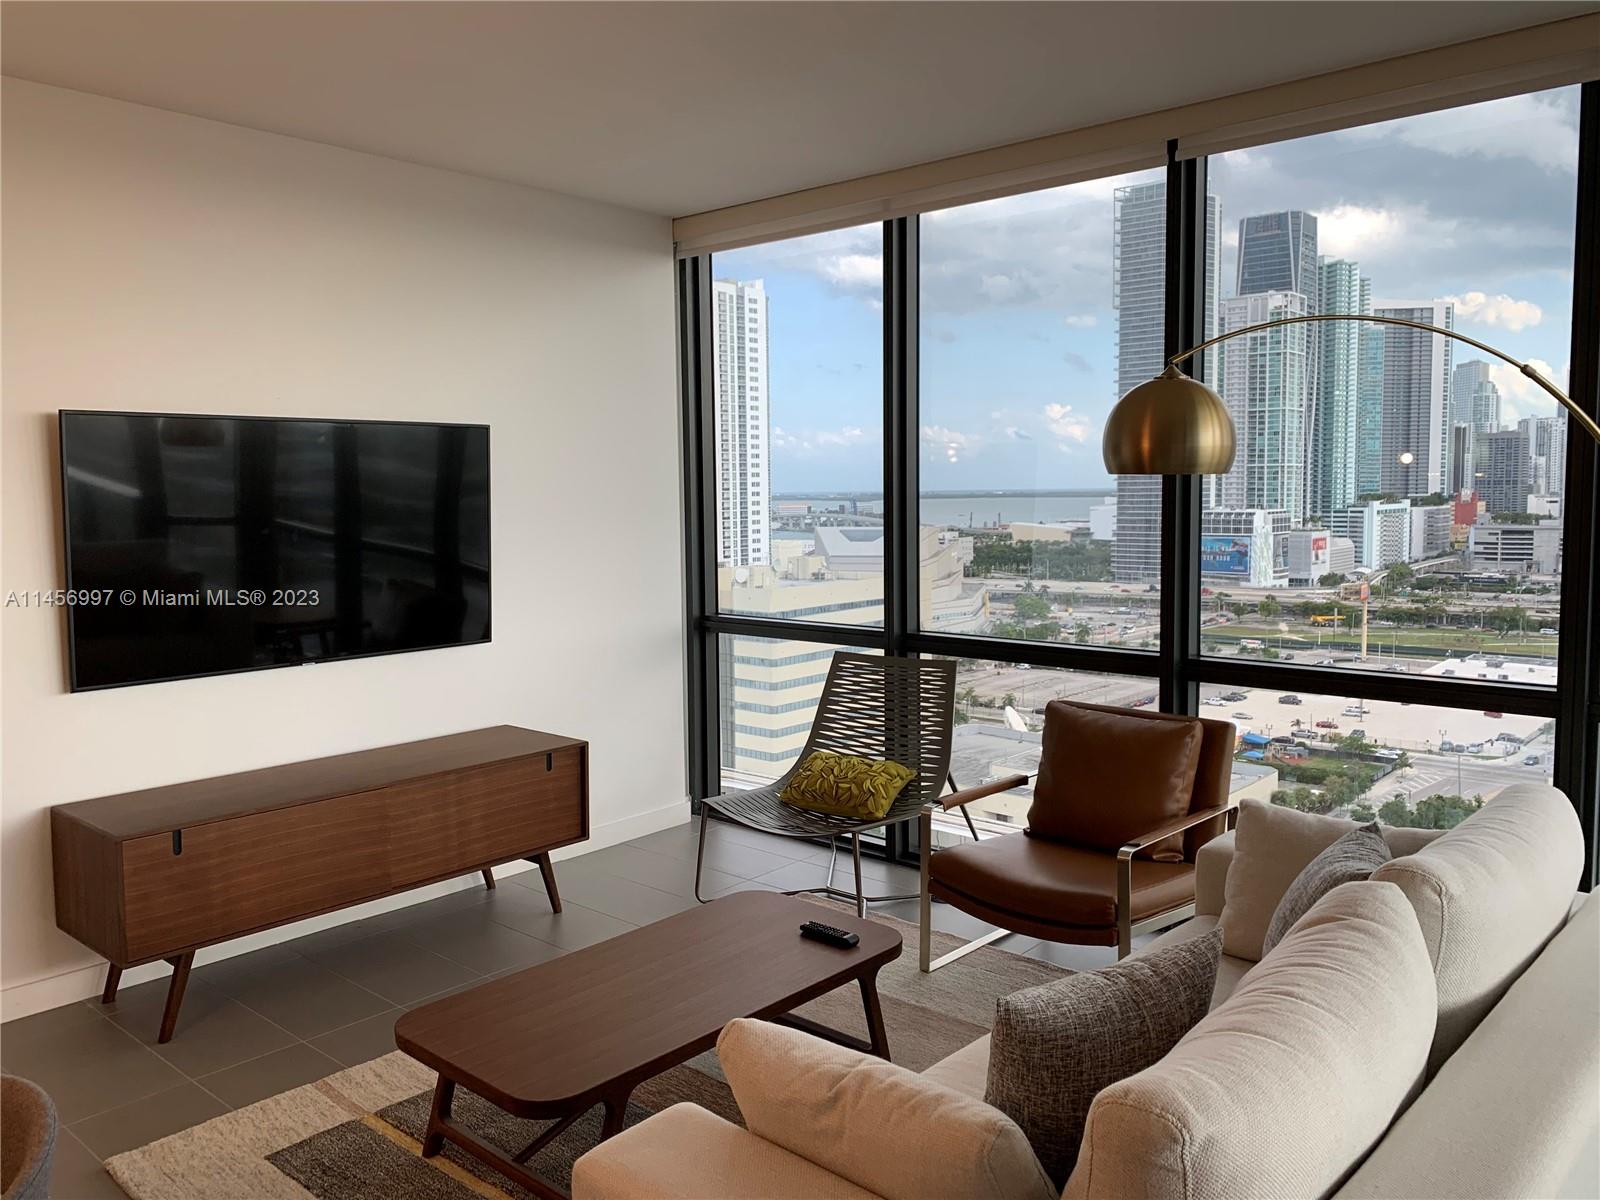 Canvas Condominio Splendor: Step into Miami's urban allure with unit 1810 – an exquisite corner gem at Canvas. Fully furnished, this home is a fusion of elegance with split bedrooms and 2 state-of-the-art baths. Bask in panoramic views while enjoying the array of amenities Canvas offers. Natural light, impeccable design, and a haven of luxury await. At the heart of Miami’s vibrant pulse, this is more than a home – it’s an experience. Embrace upscale living.